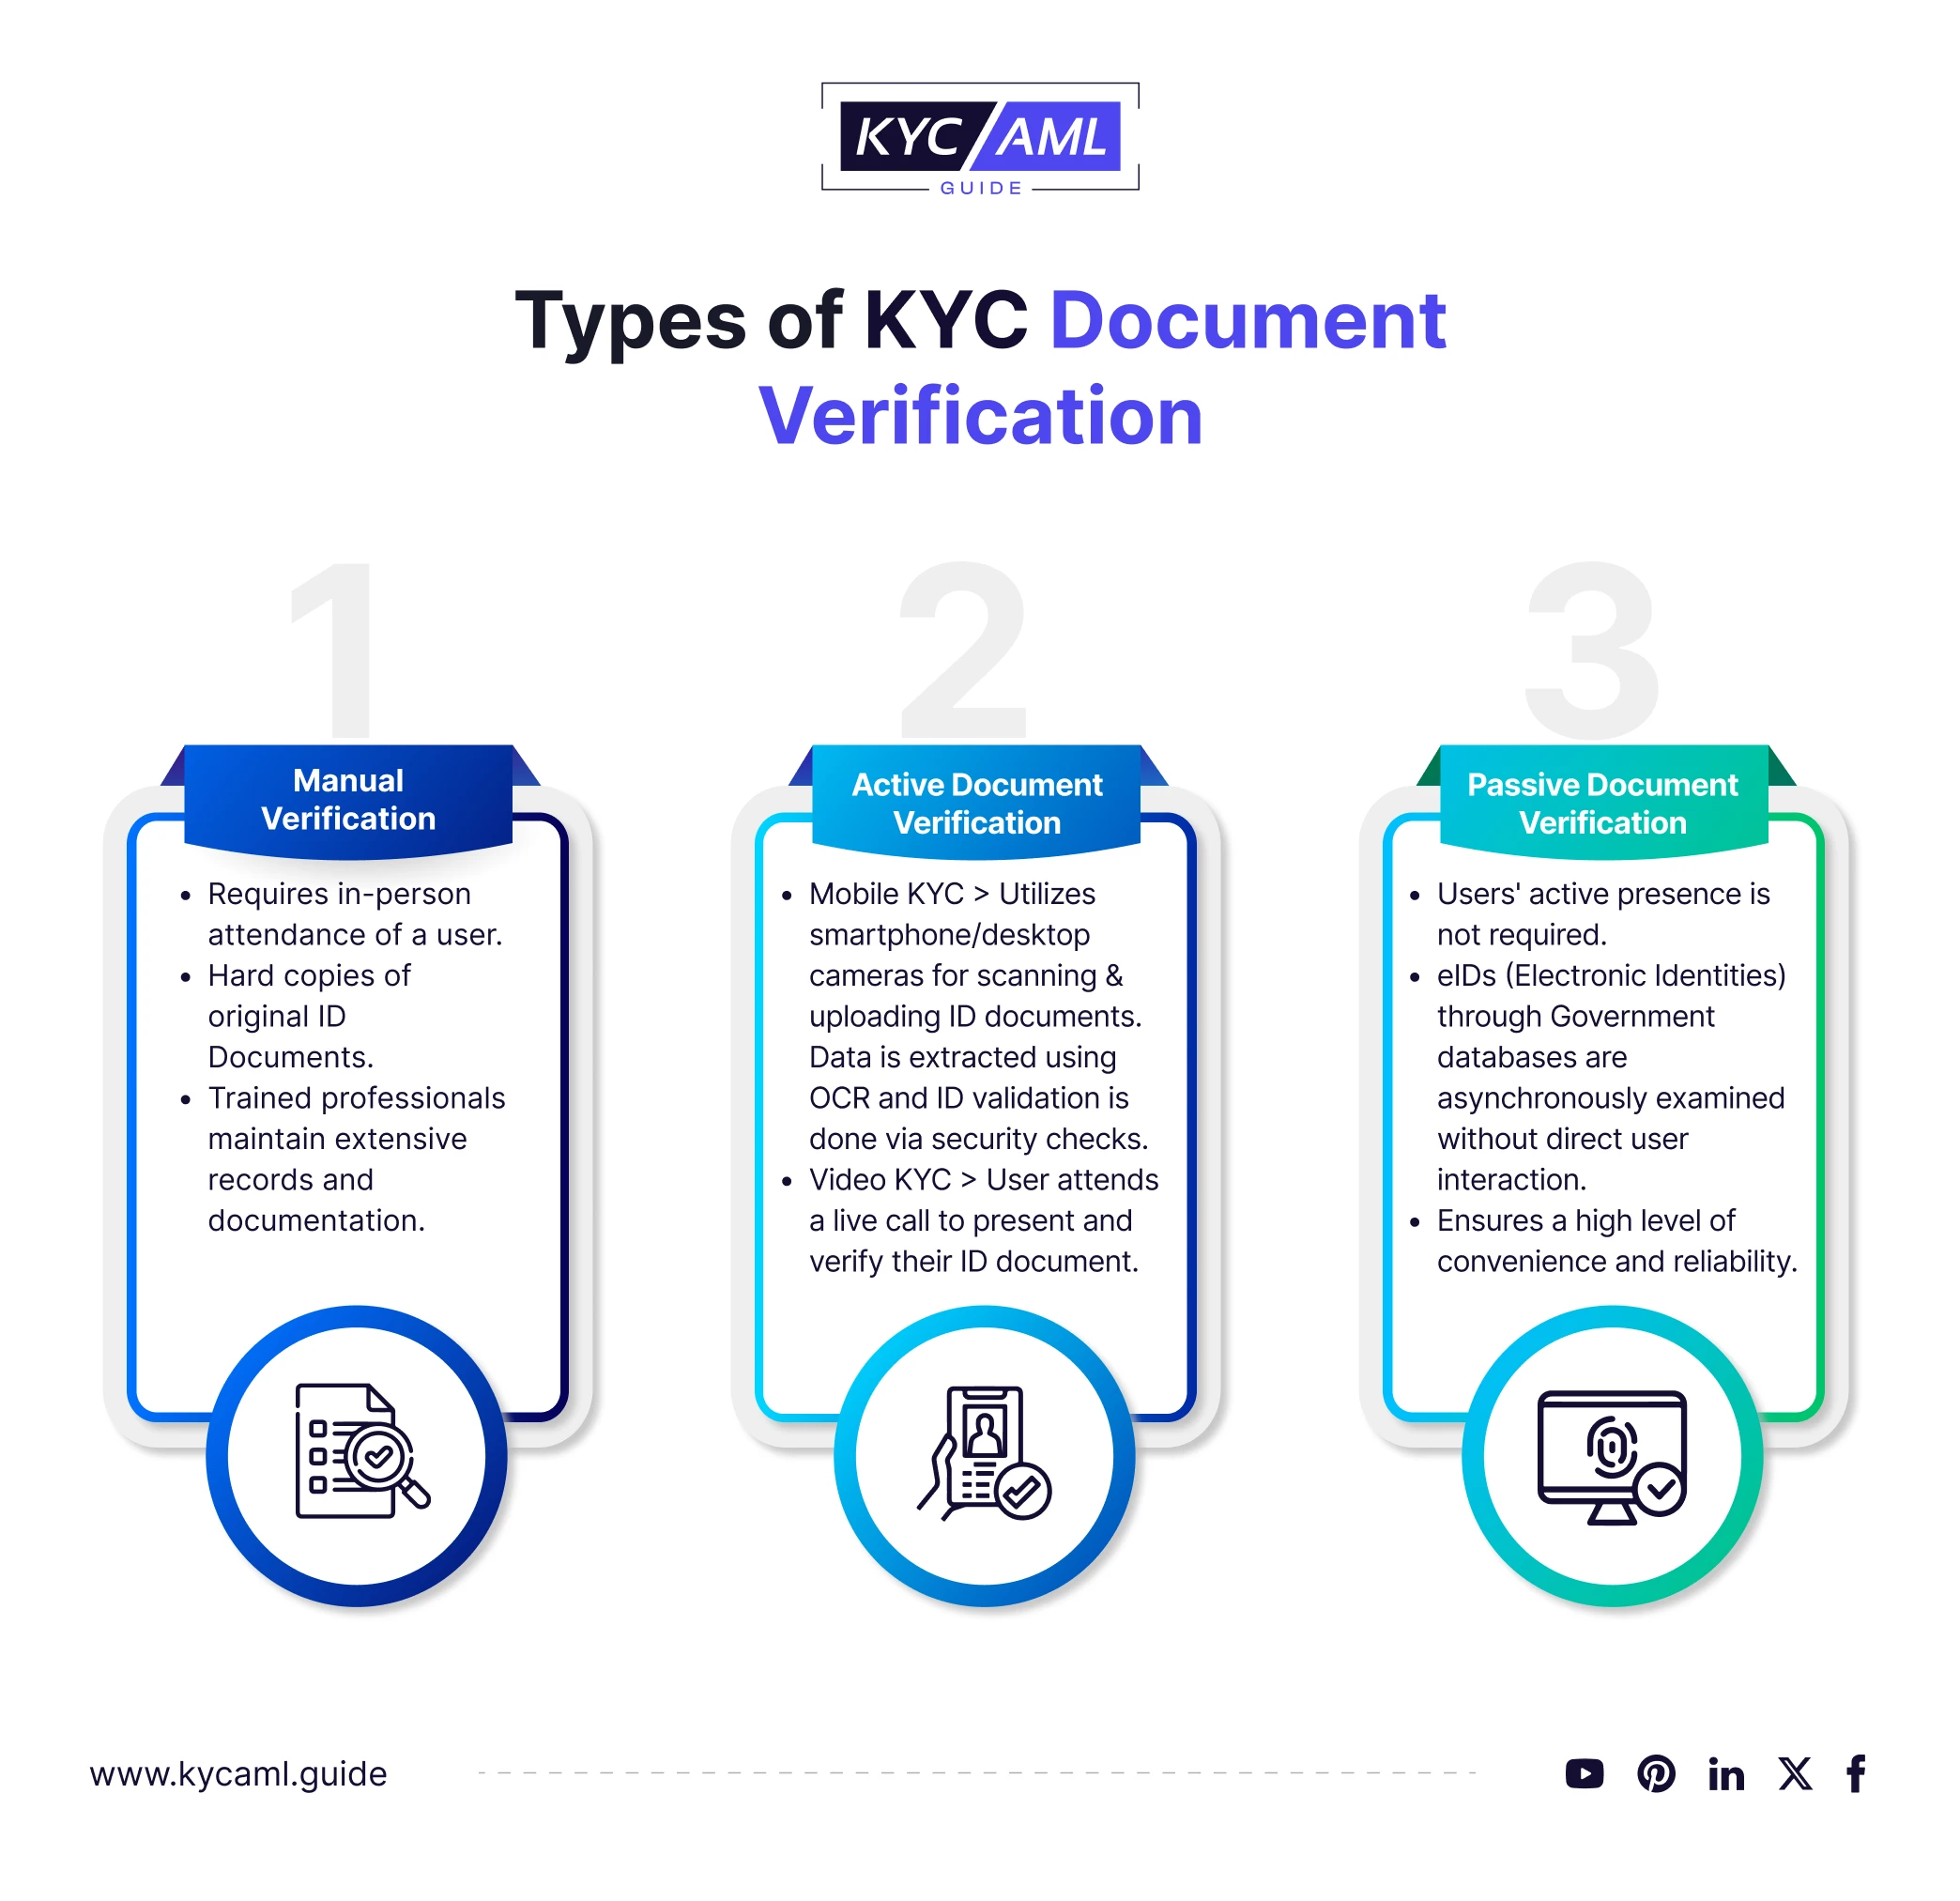 This infographic shows the three types of KYC document verification i.e. manual, active, and passive document verification